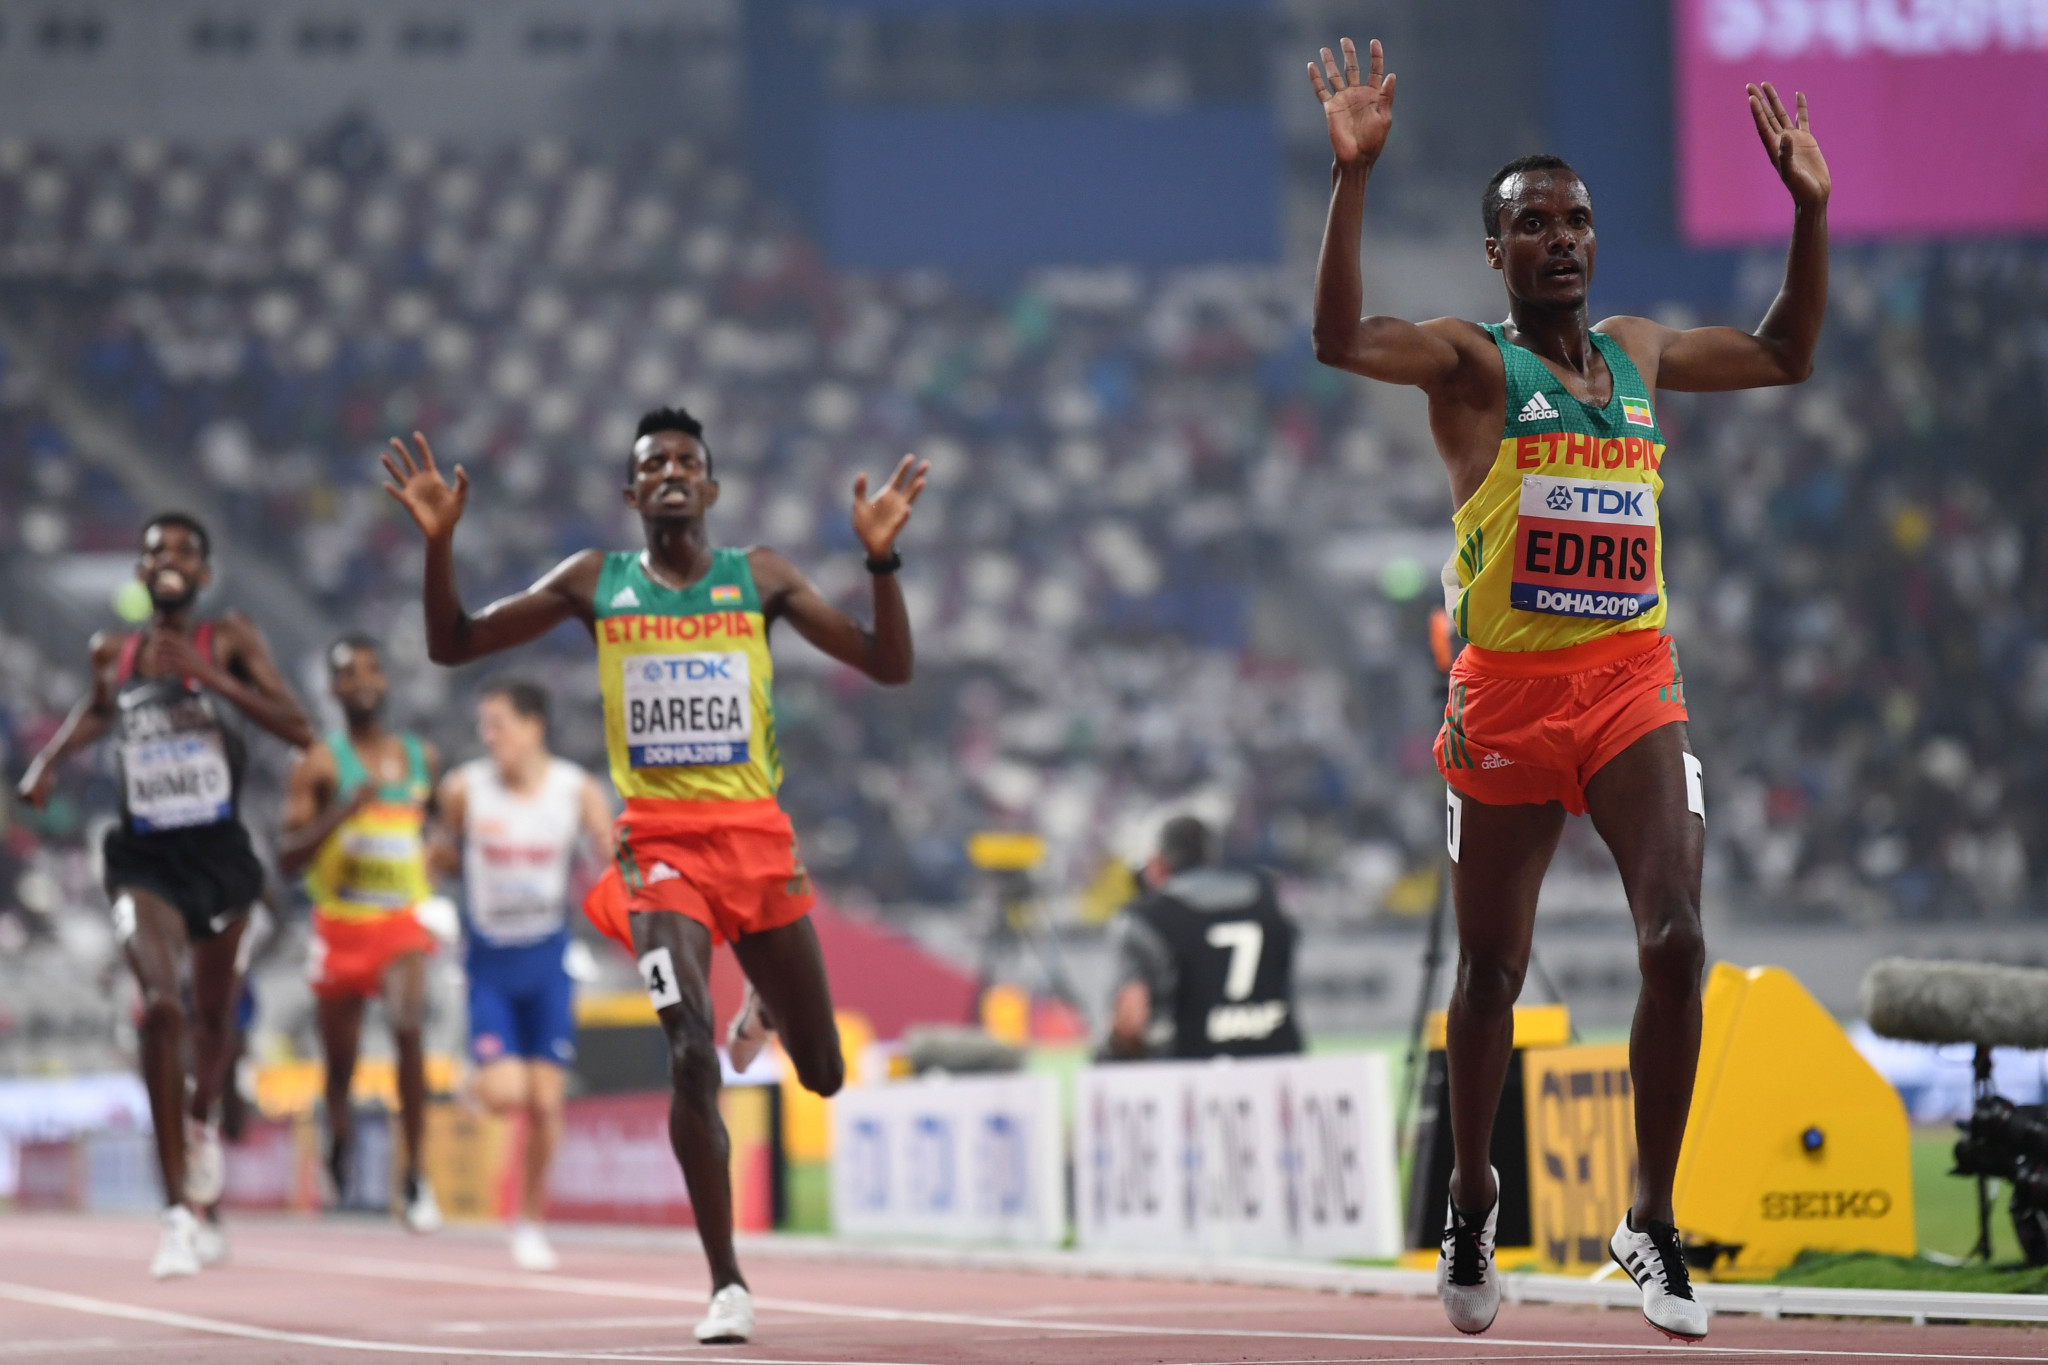 Ethiopia's Muktar Edris retains his world 5,000m title after an epic contest in Doha ©Getty Images